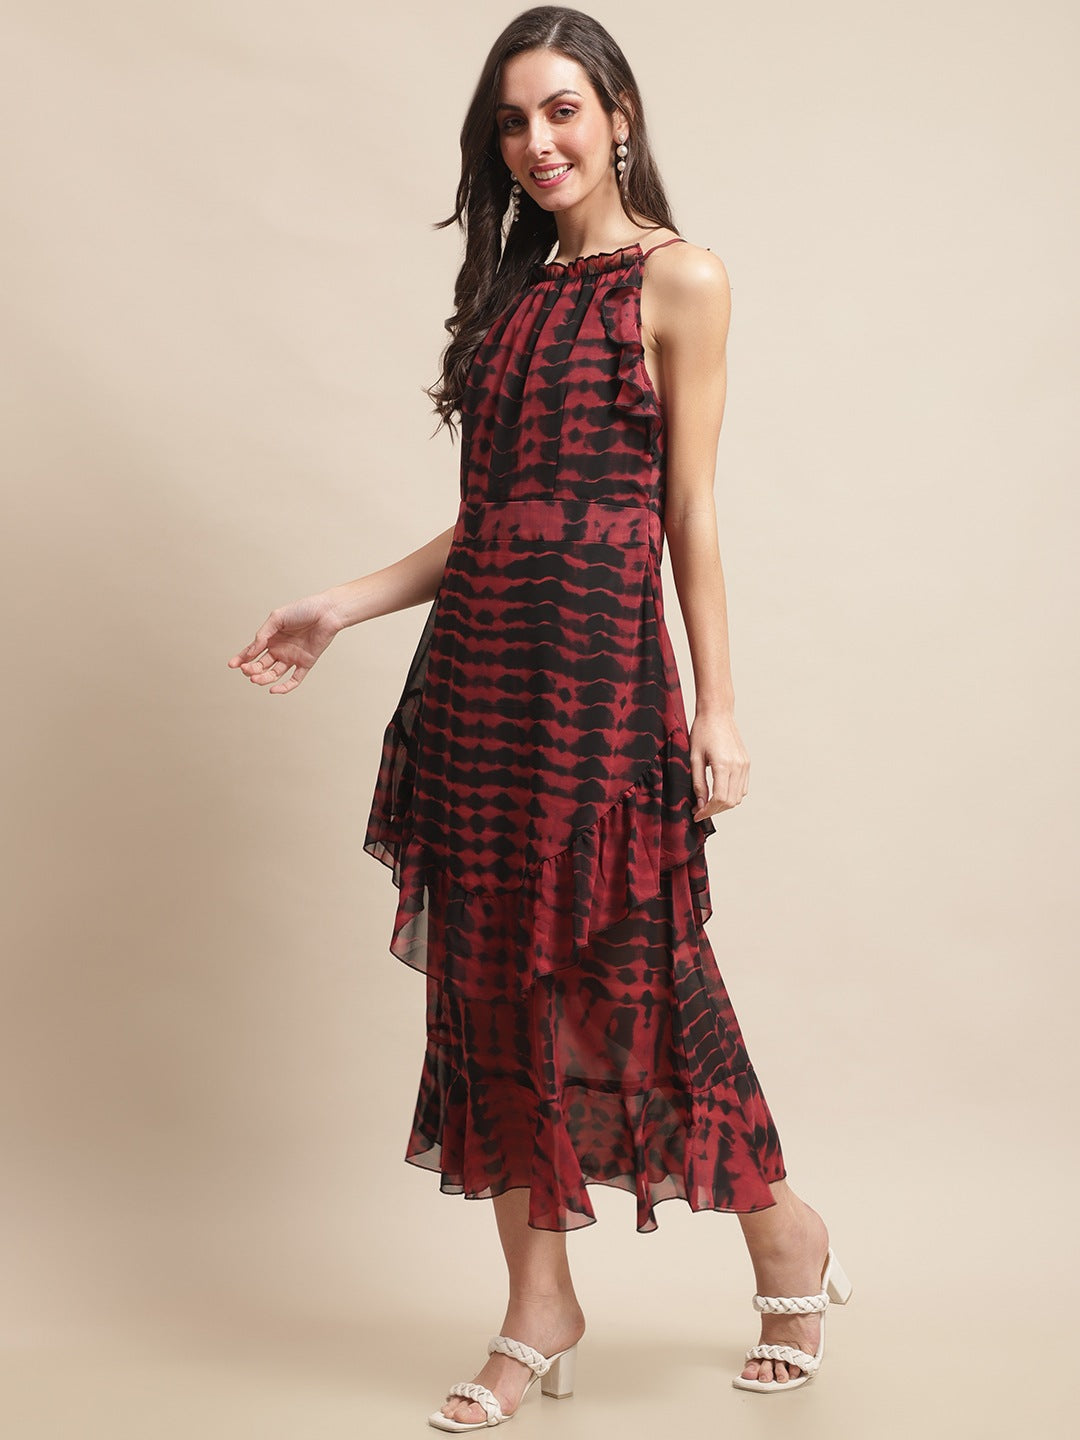 Maroon Color Abstract Printed Georgette Dress For Women Claura Designs Pvt. Ltd. Ethic dress Abstract, black, Dresses, Georgette, Maroon, Printed